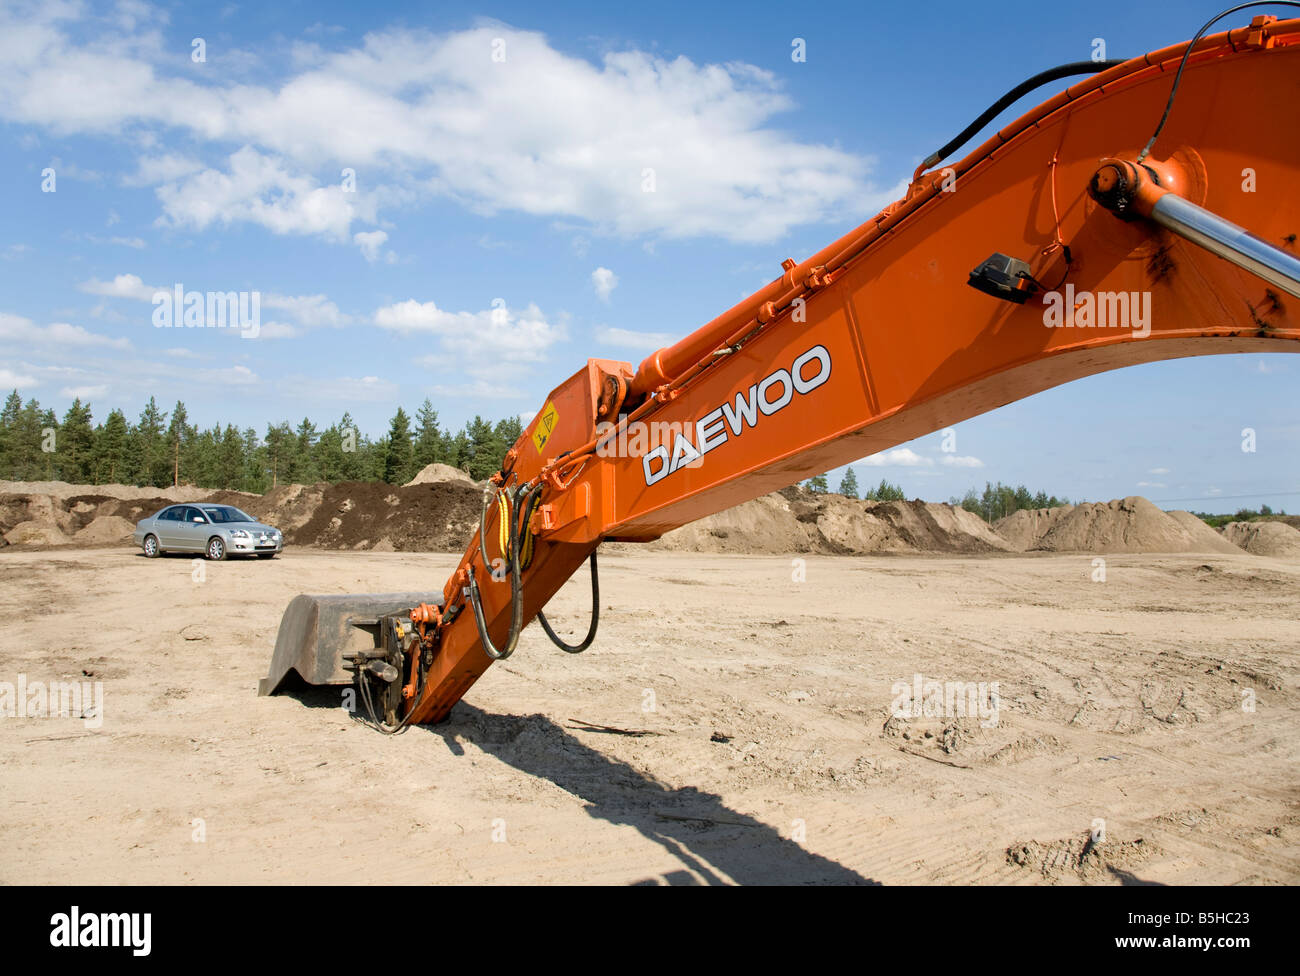 Orange Daewoo digger boom extended and Toyota Avensis car , Finland Stock Photo